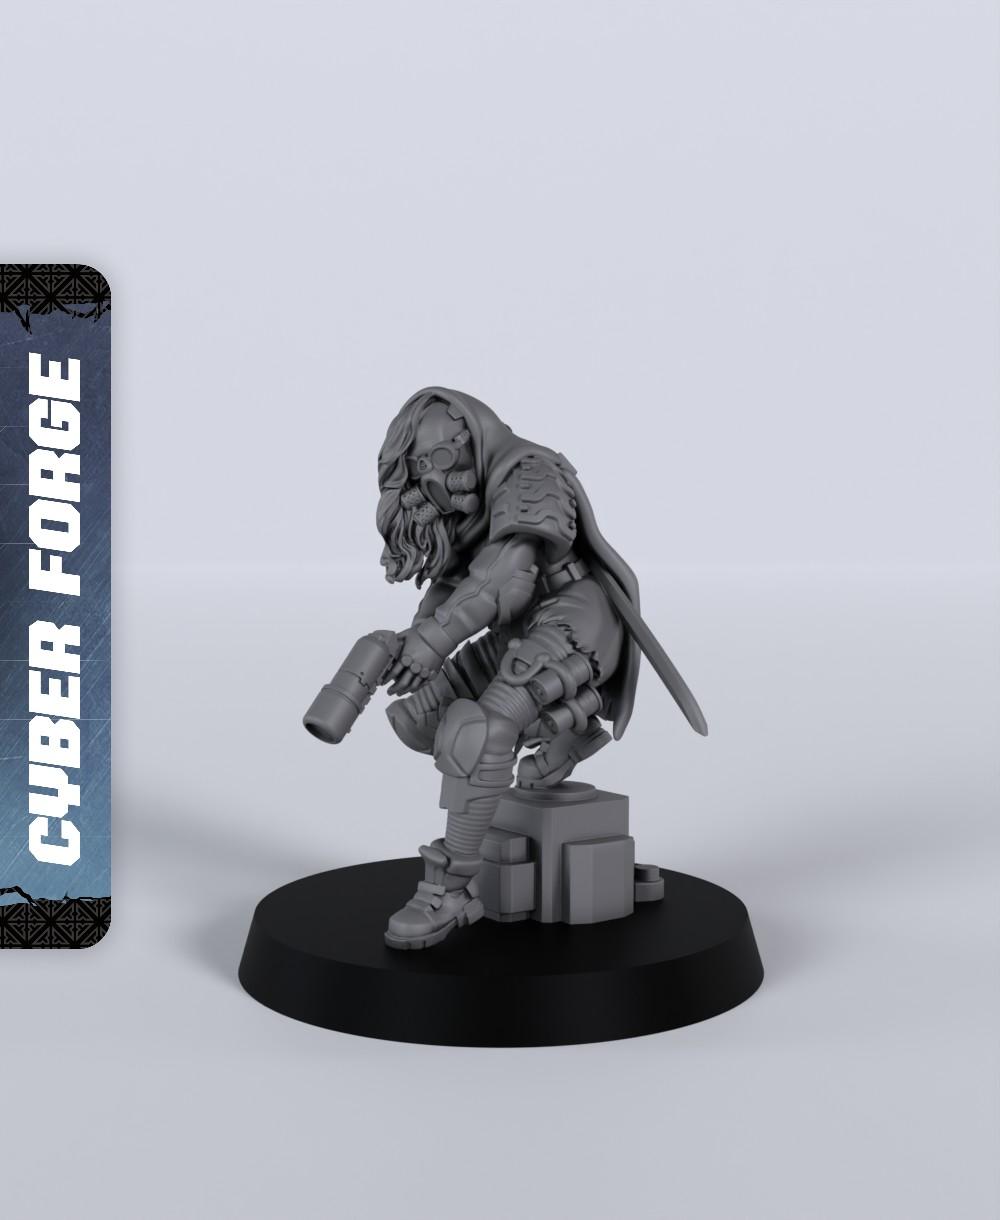 Dora Flare - With Free Cyberpunk Warhammer - 40k Sci-Fi Gift Ideas for RPG and Wargamers 3d model